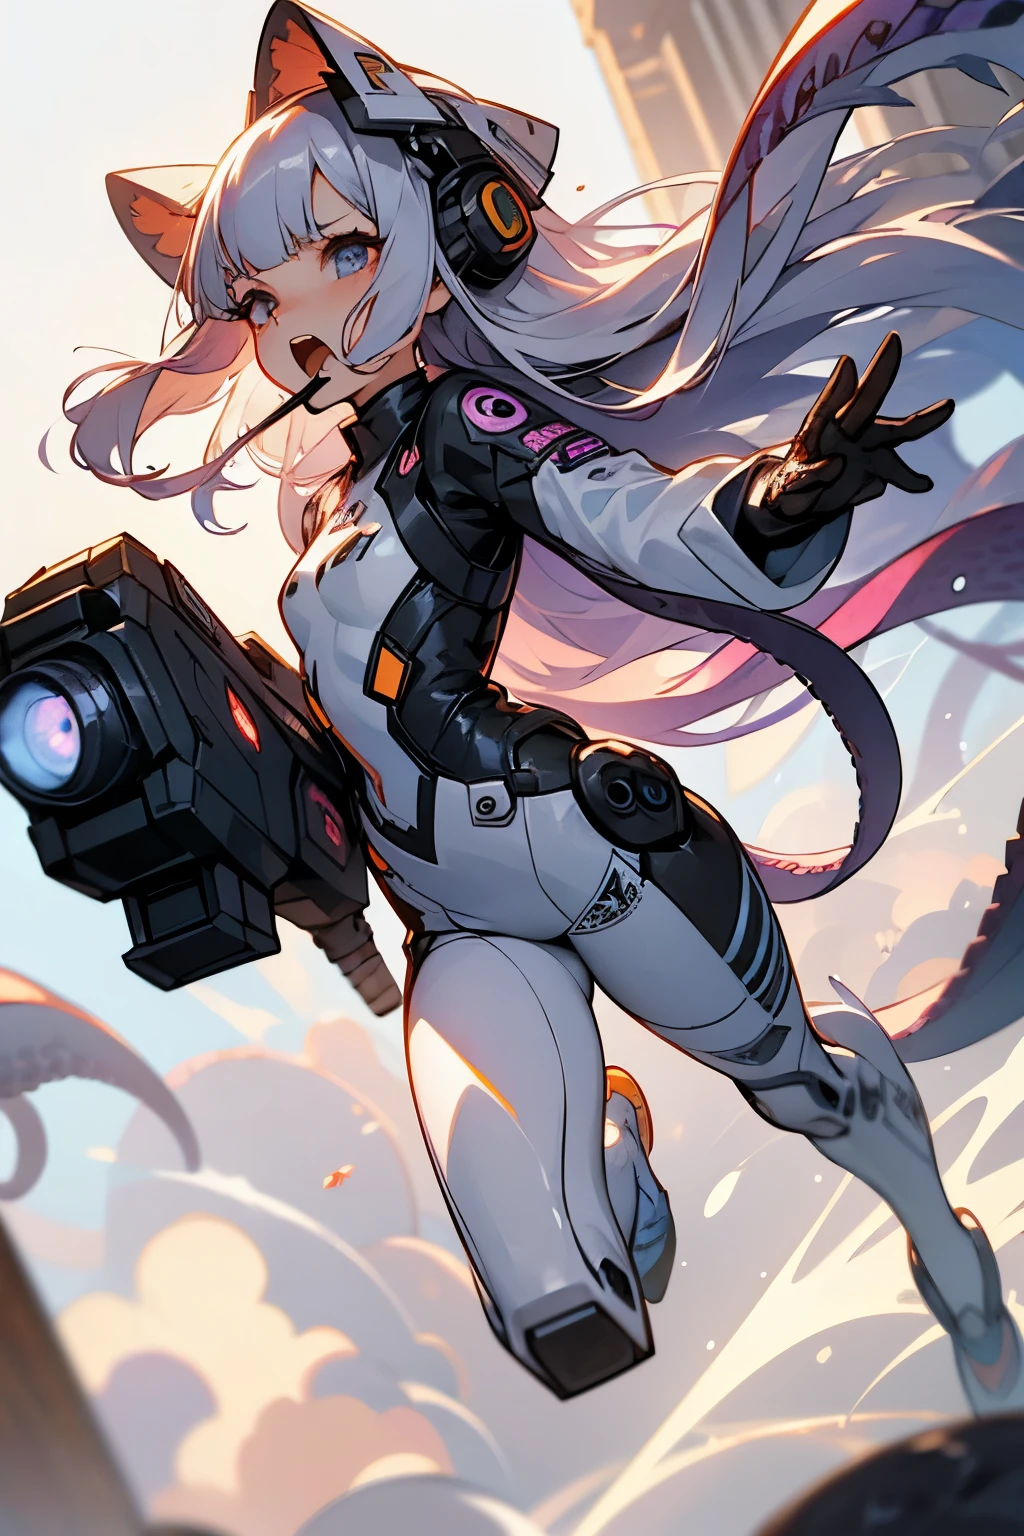 (Ultra-detailed face, roar, shout), (Full body, A young-aged woman with silver hair, blunt bangs, very long disheveled hair, and lavender eyes), (She wears a white combat suit with futuristic geometric patterns, a headset with a microphone, and a laser gun), BREAK (She roars, screams, and boldly fires her laser gun at a multitude of octopus aliens and glowing Adamski UFOs), BREAK (In the background, an army of ferocious octopus aliens, burning, smoking, destroyed buildings, and UFOs fly by)